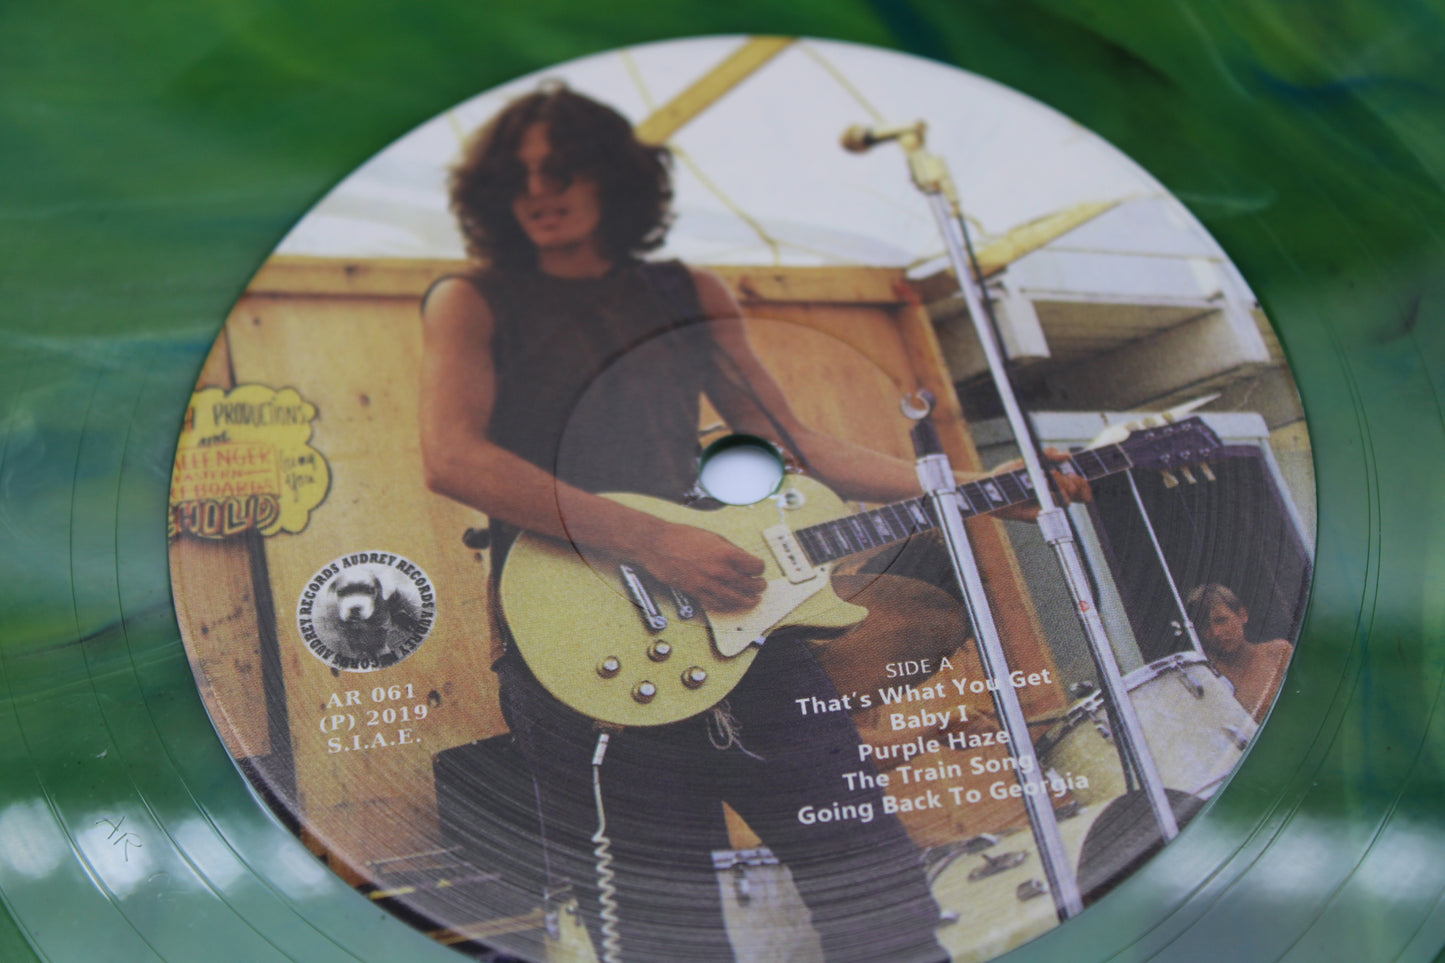 Bruce Springsteen Demo 1960s-1970 - Limited Edition Color Vinyl - Italy - Demo & Live Performances BLV